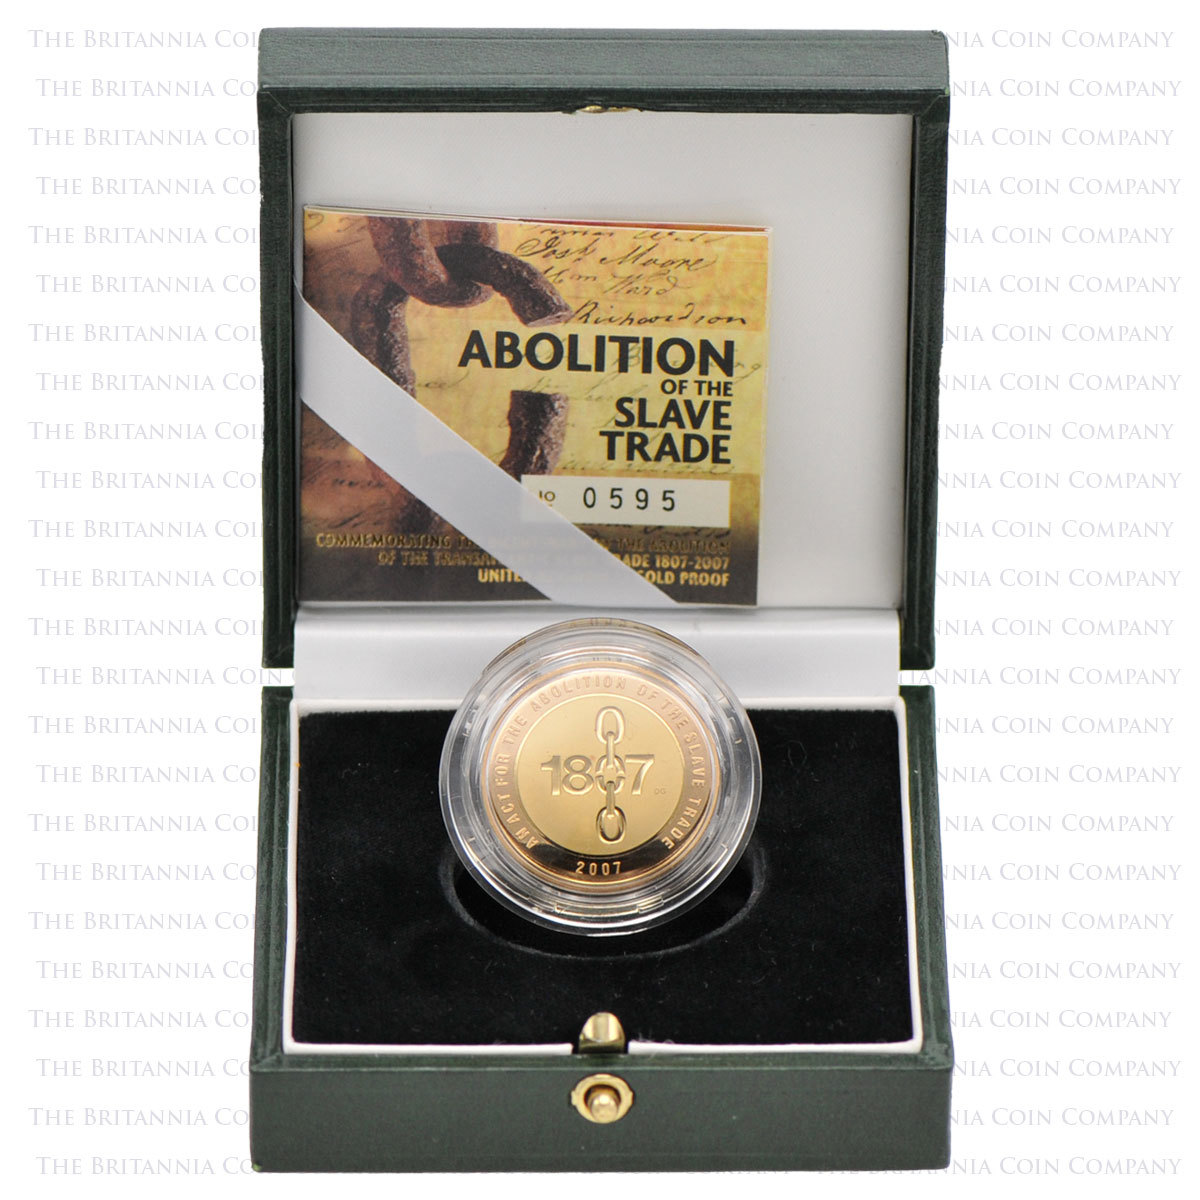 2007-PROOF-£2-ABOLITION-COIN-BOXED